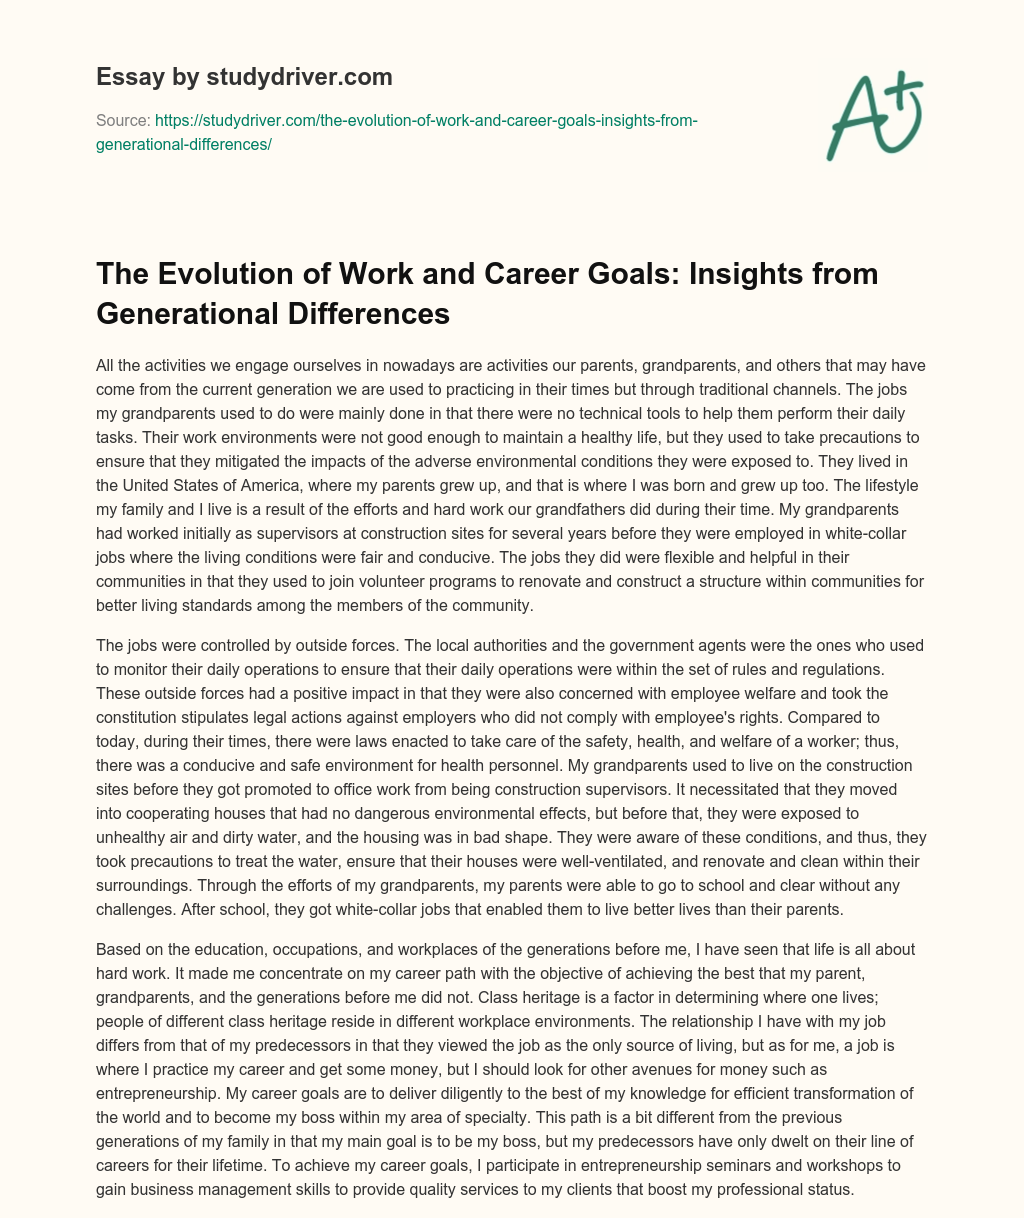 The Evolution of Work and Career Goals: Insights from Generational Differences essay